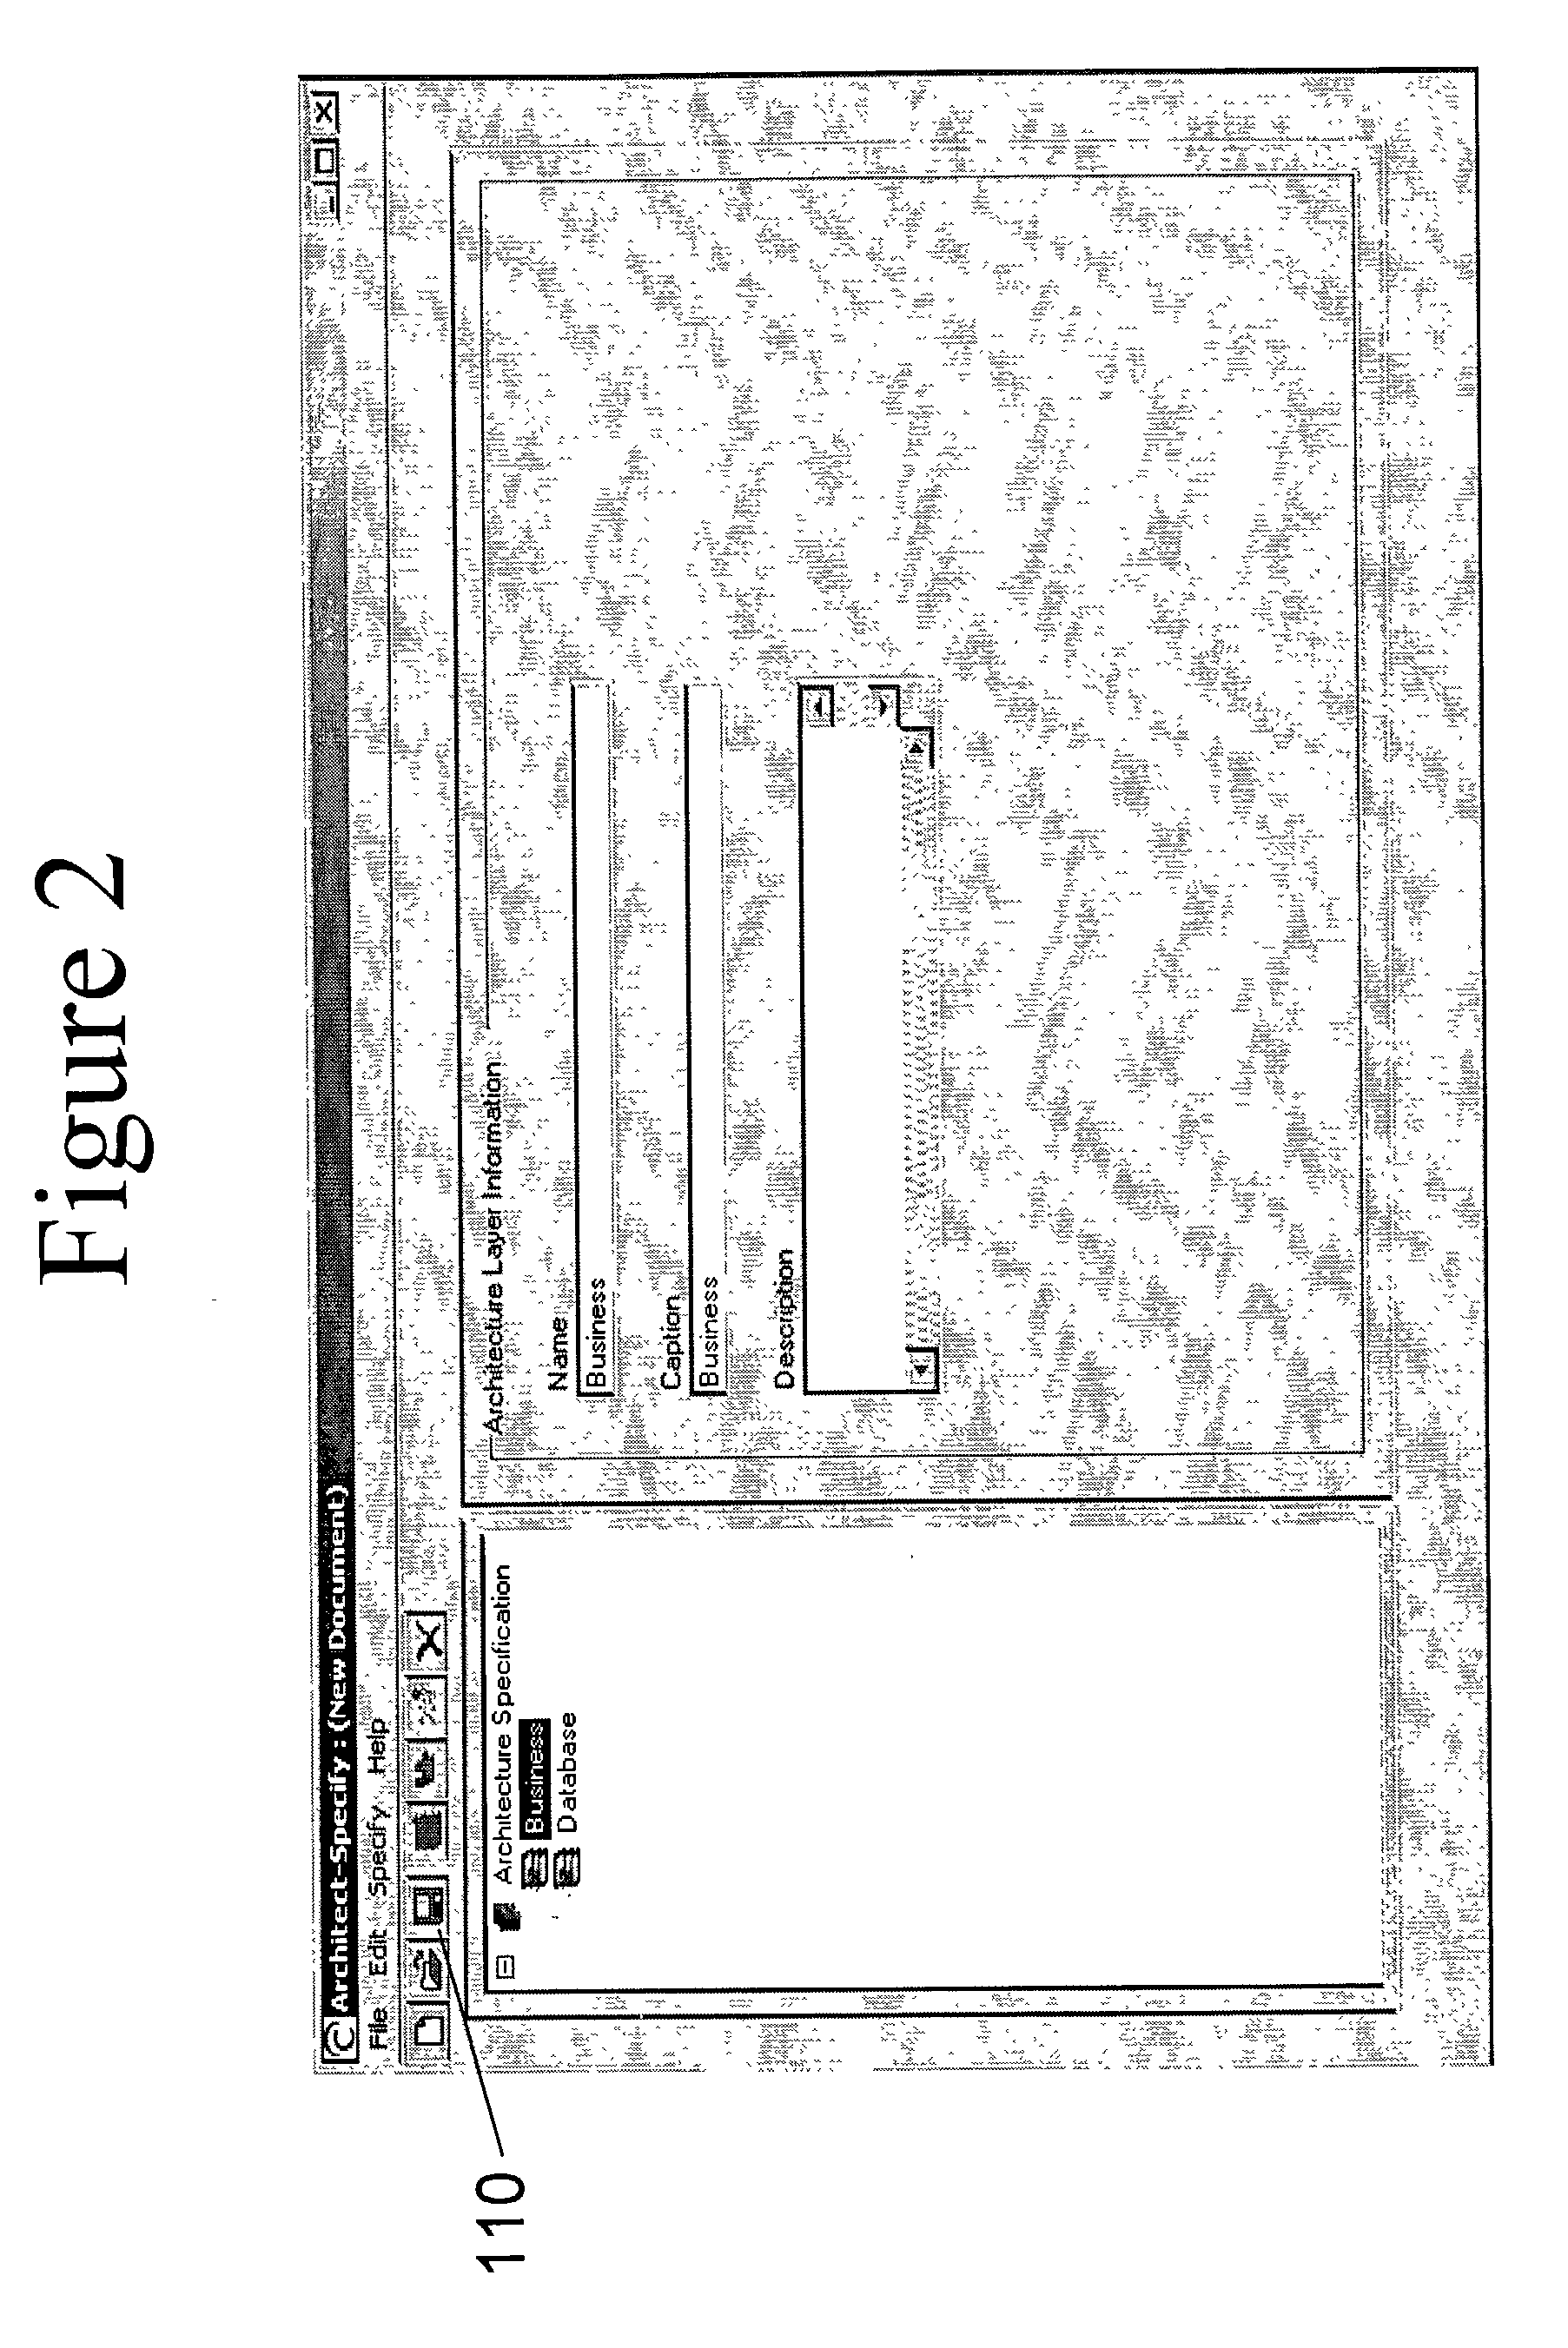 System and method for managing architectural layers within a software model